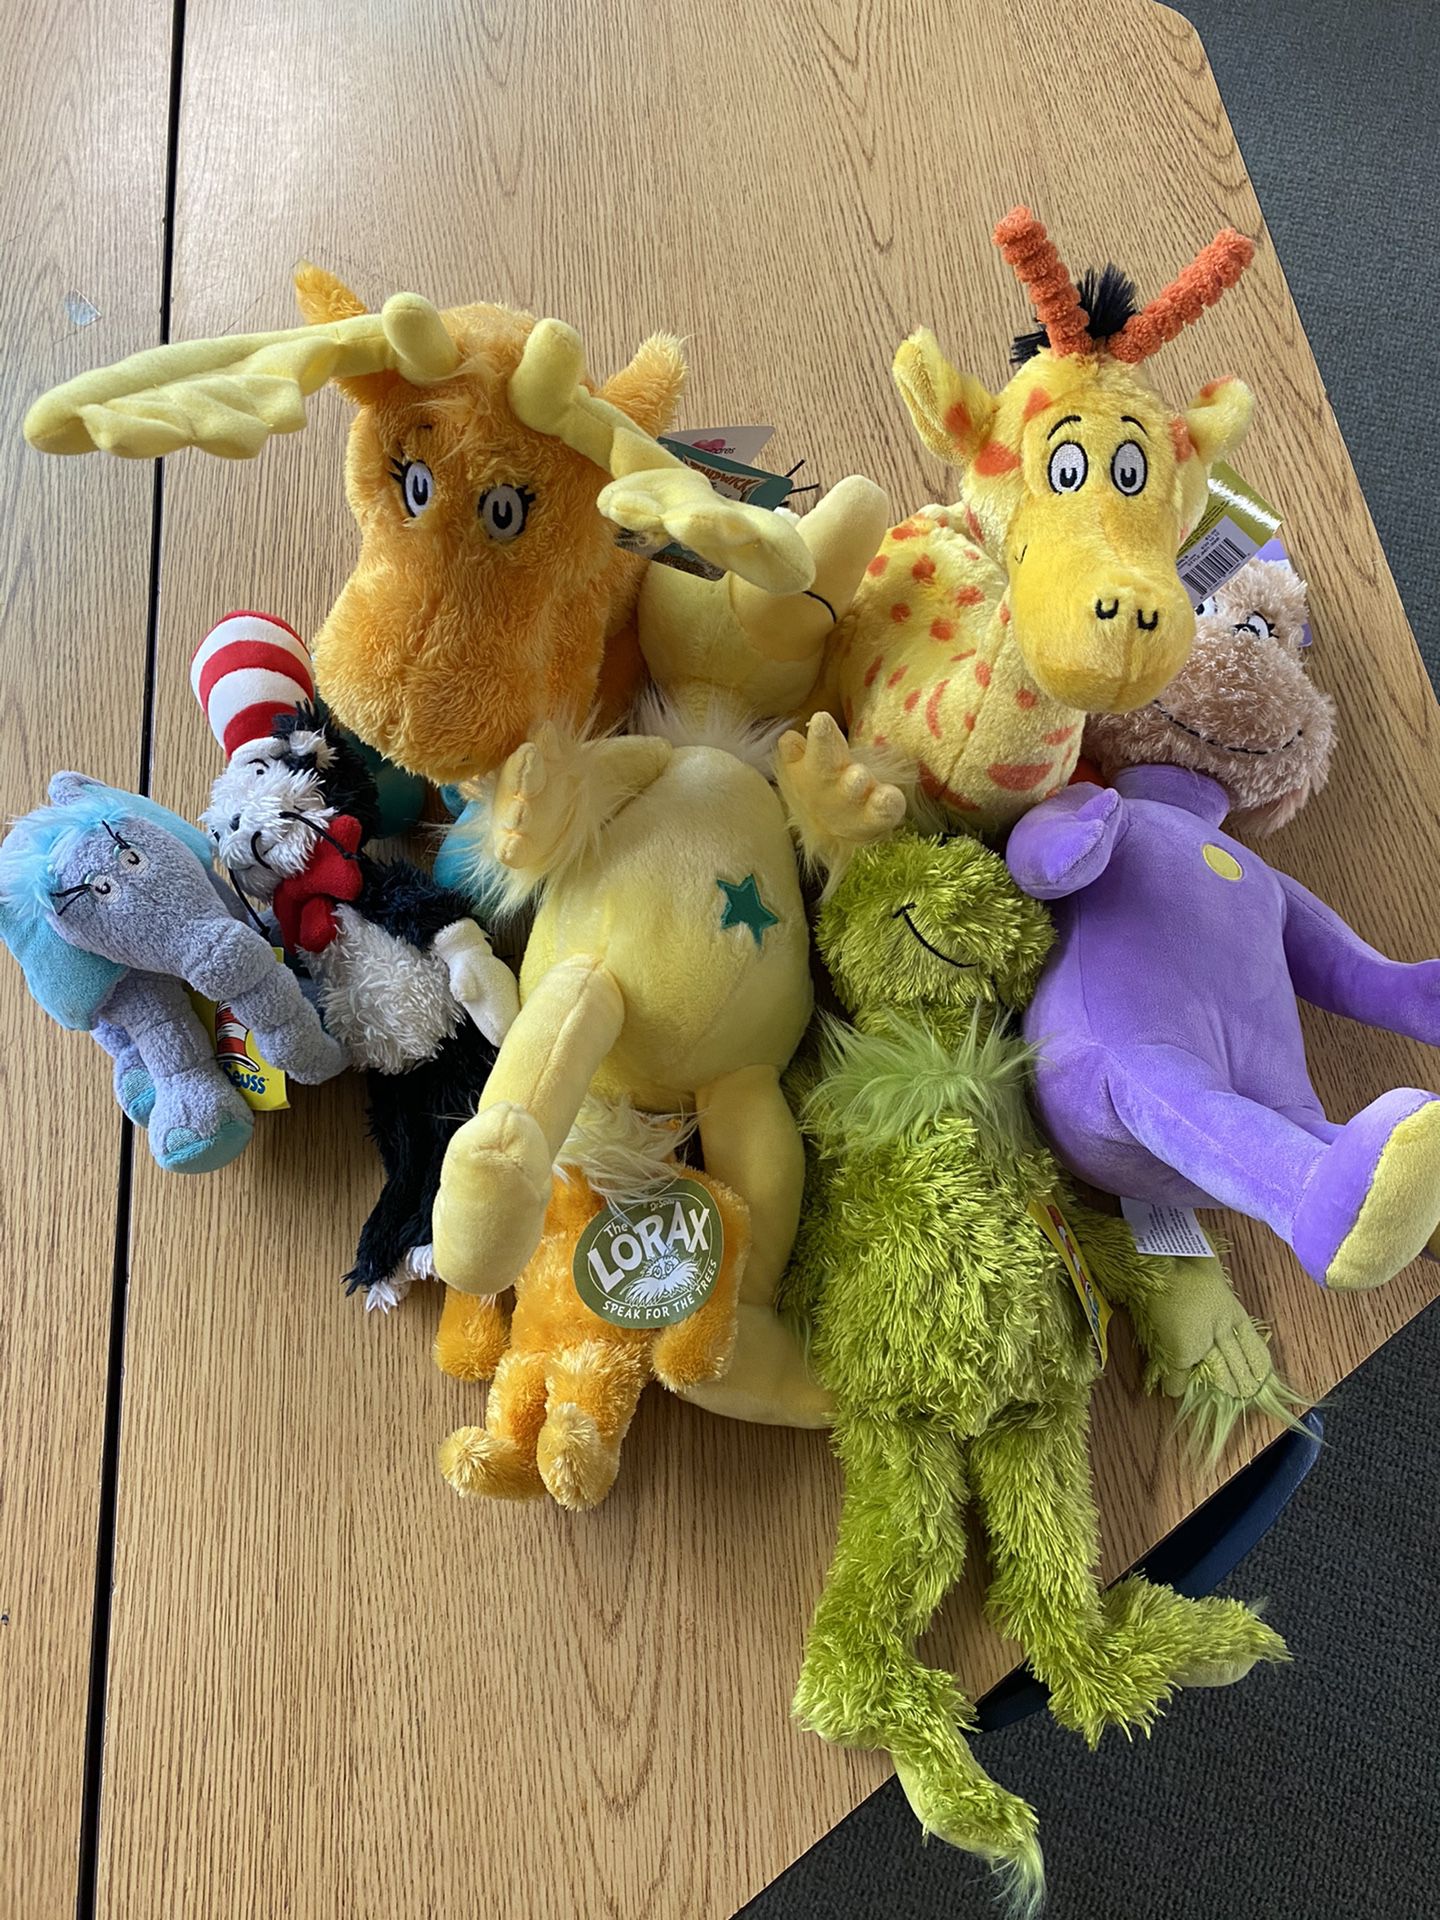 Collection of Dr. Seuss stuffed animals